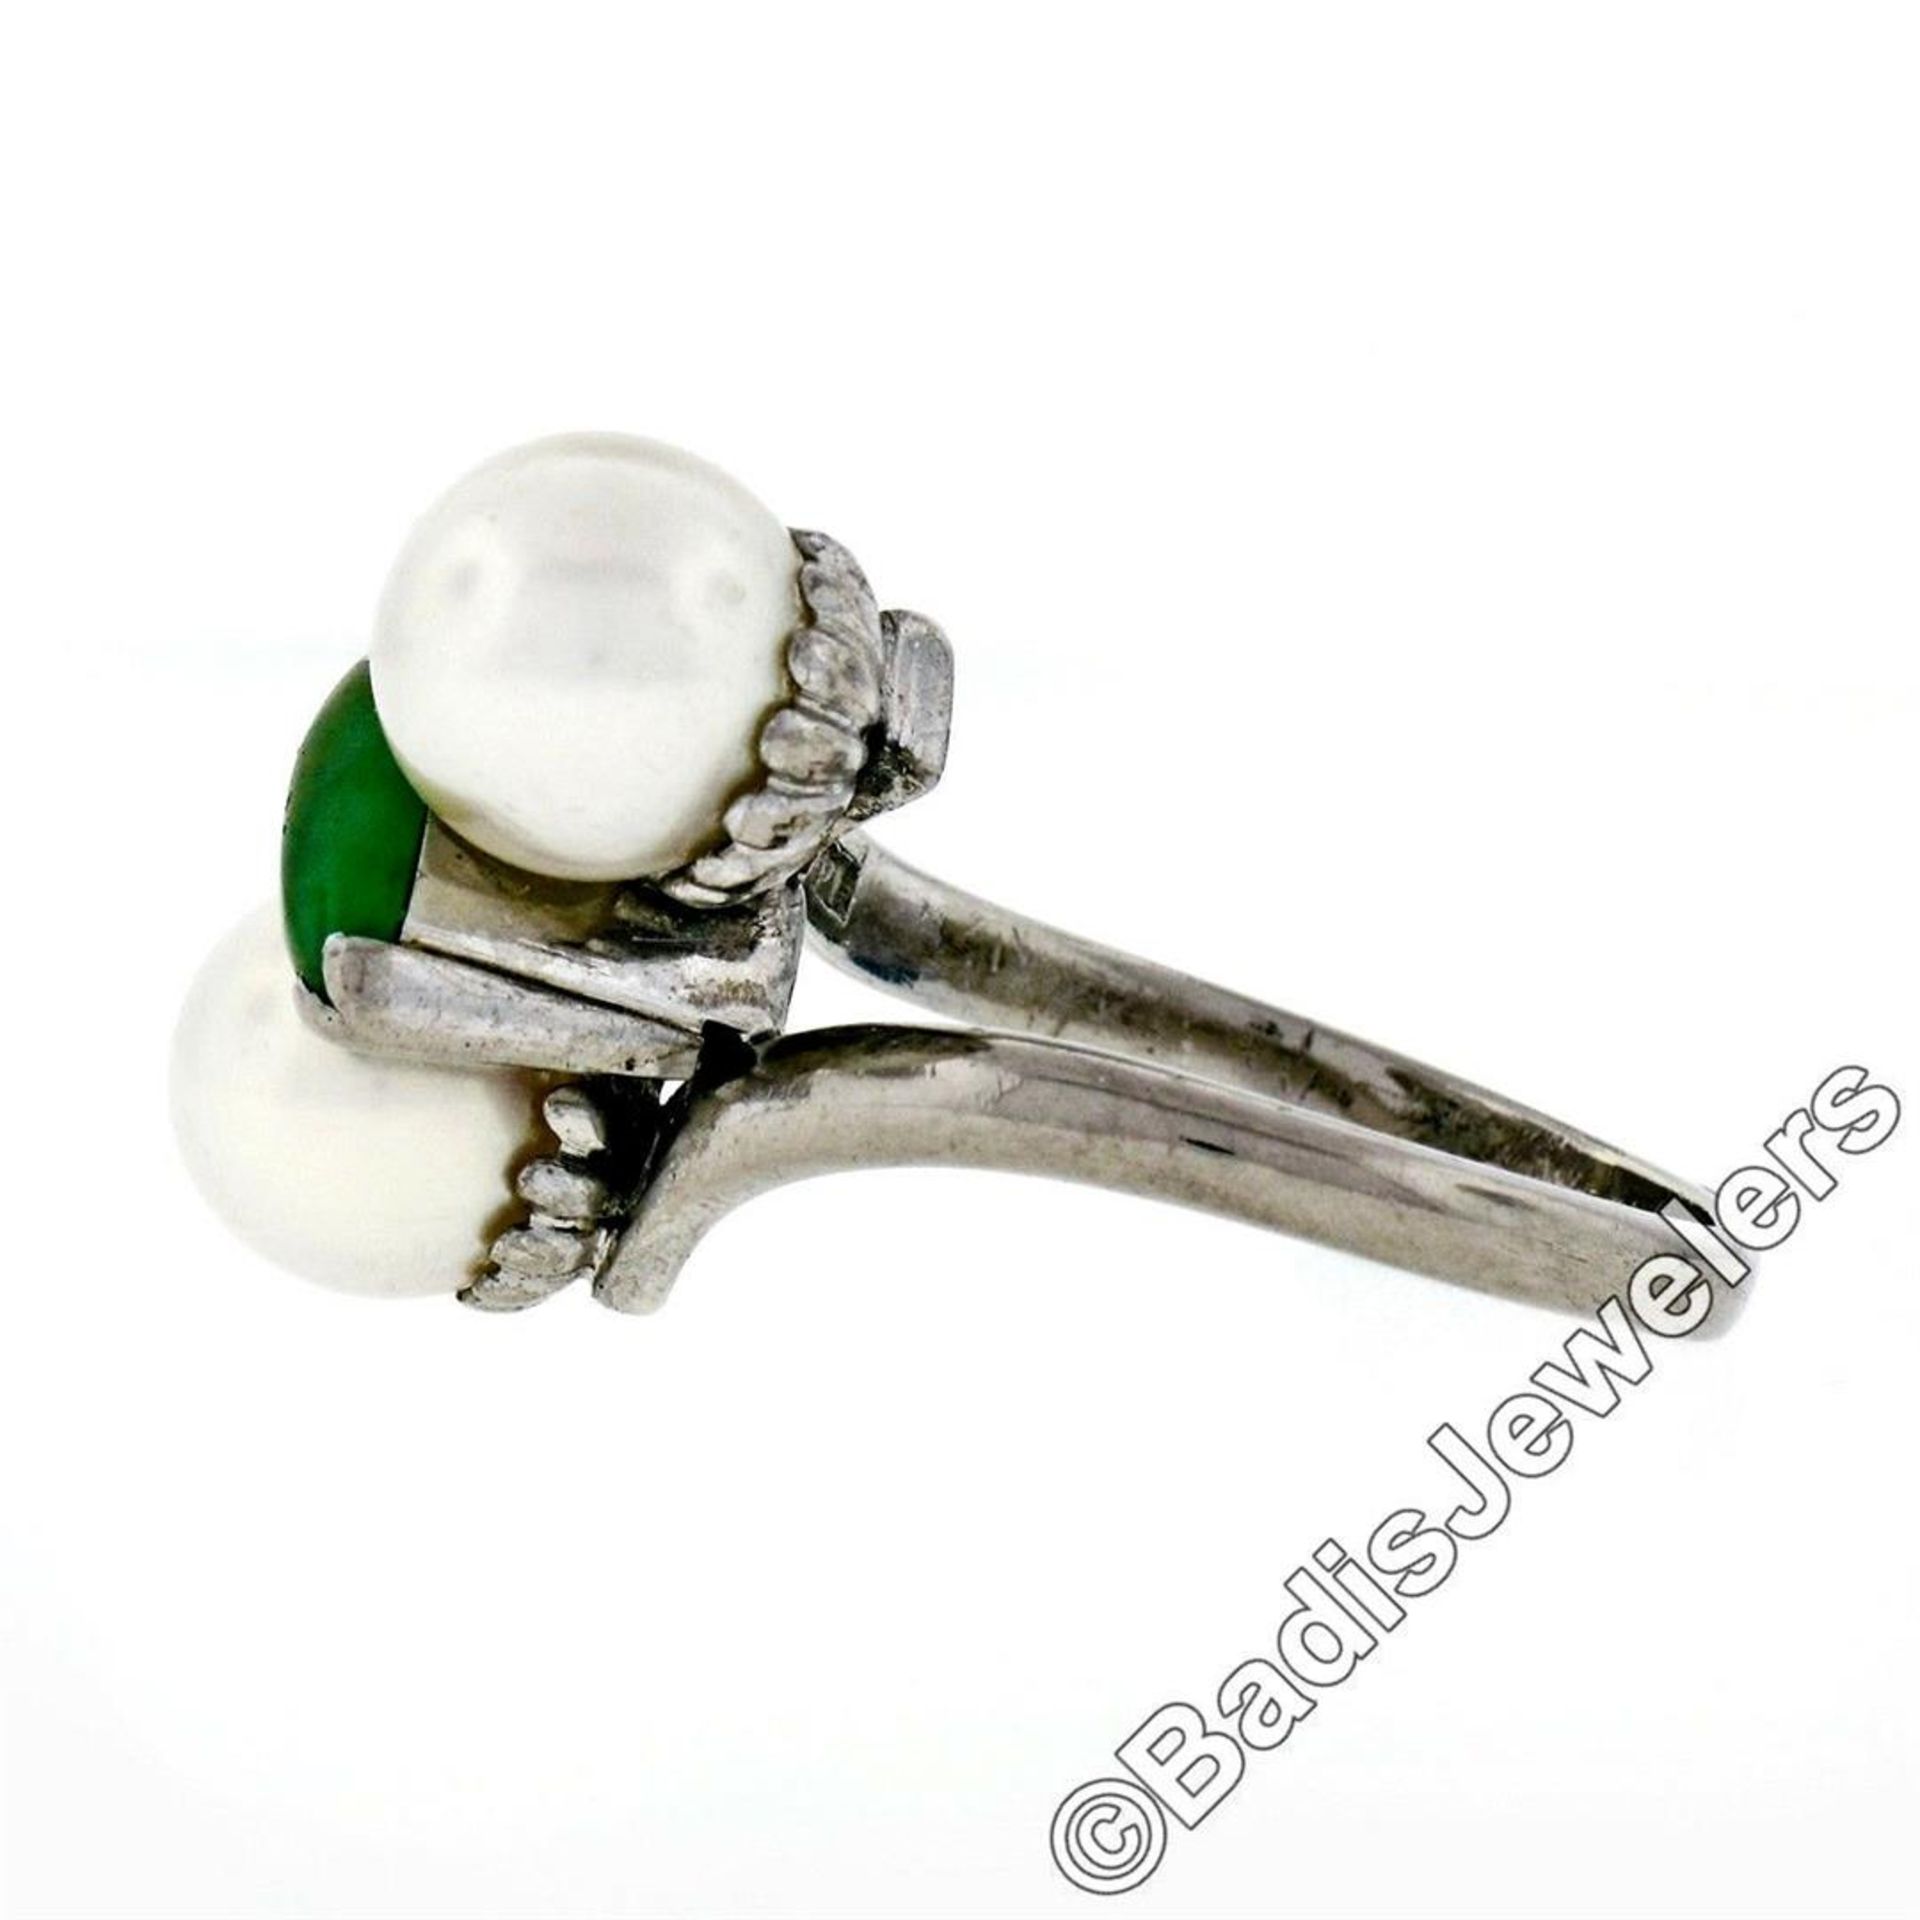 Vintage 14kt White Gold 8.35mm Round Pearl Marquise Cut Jade Bypass Ring - Image 5 of 7